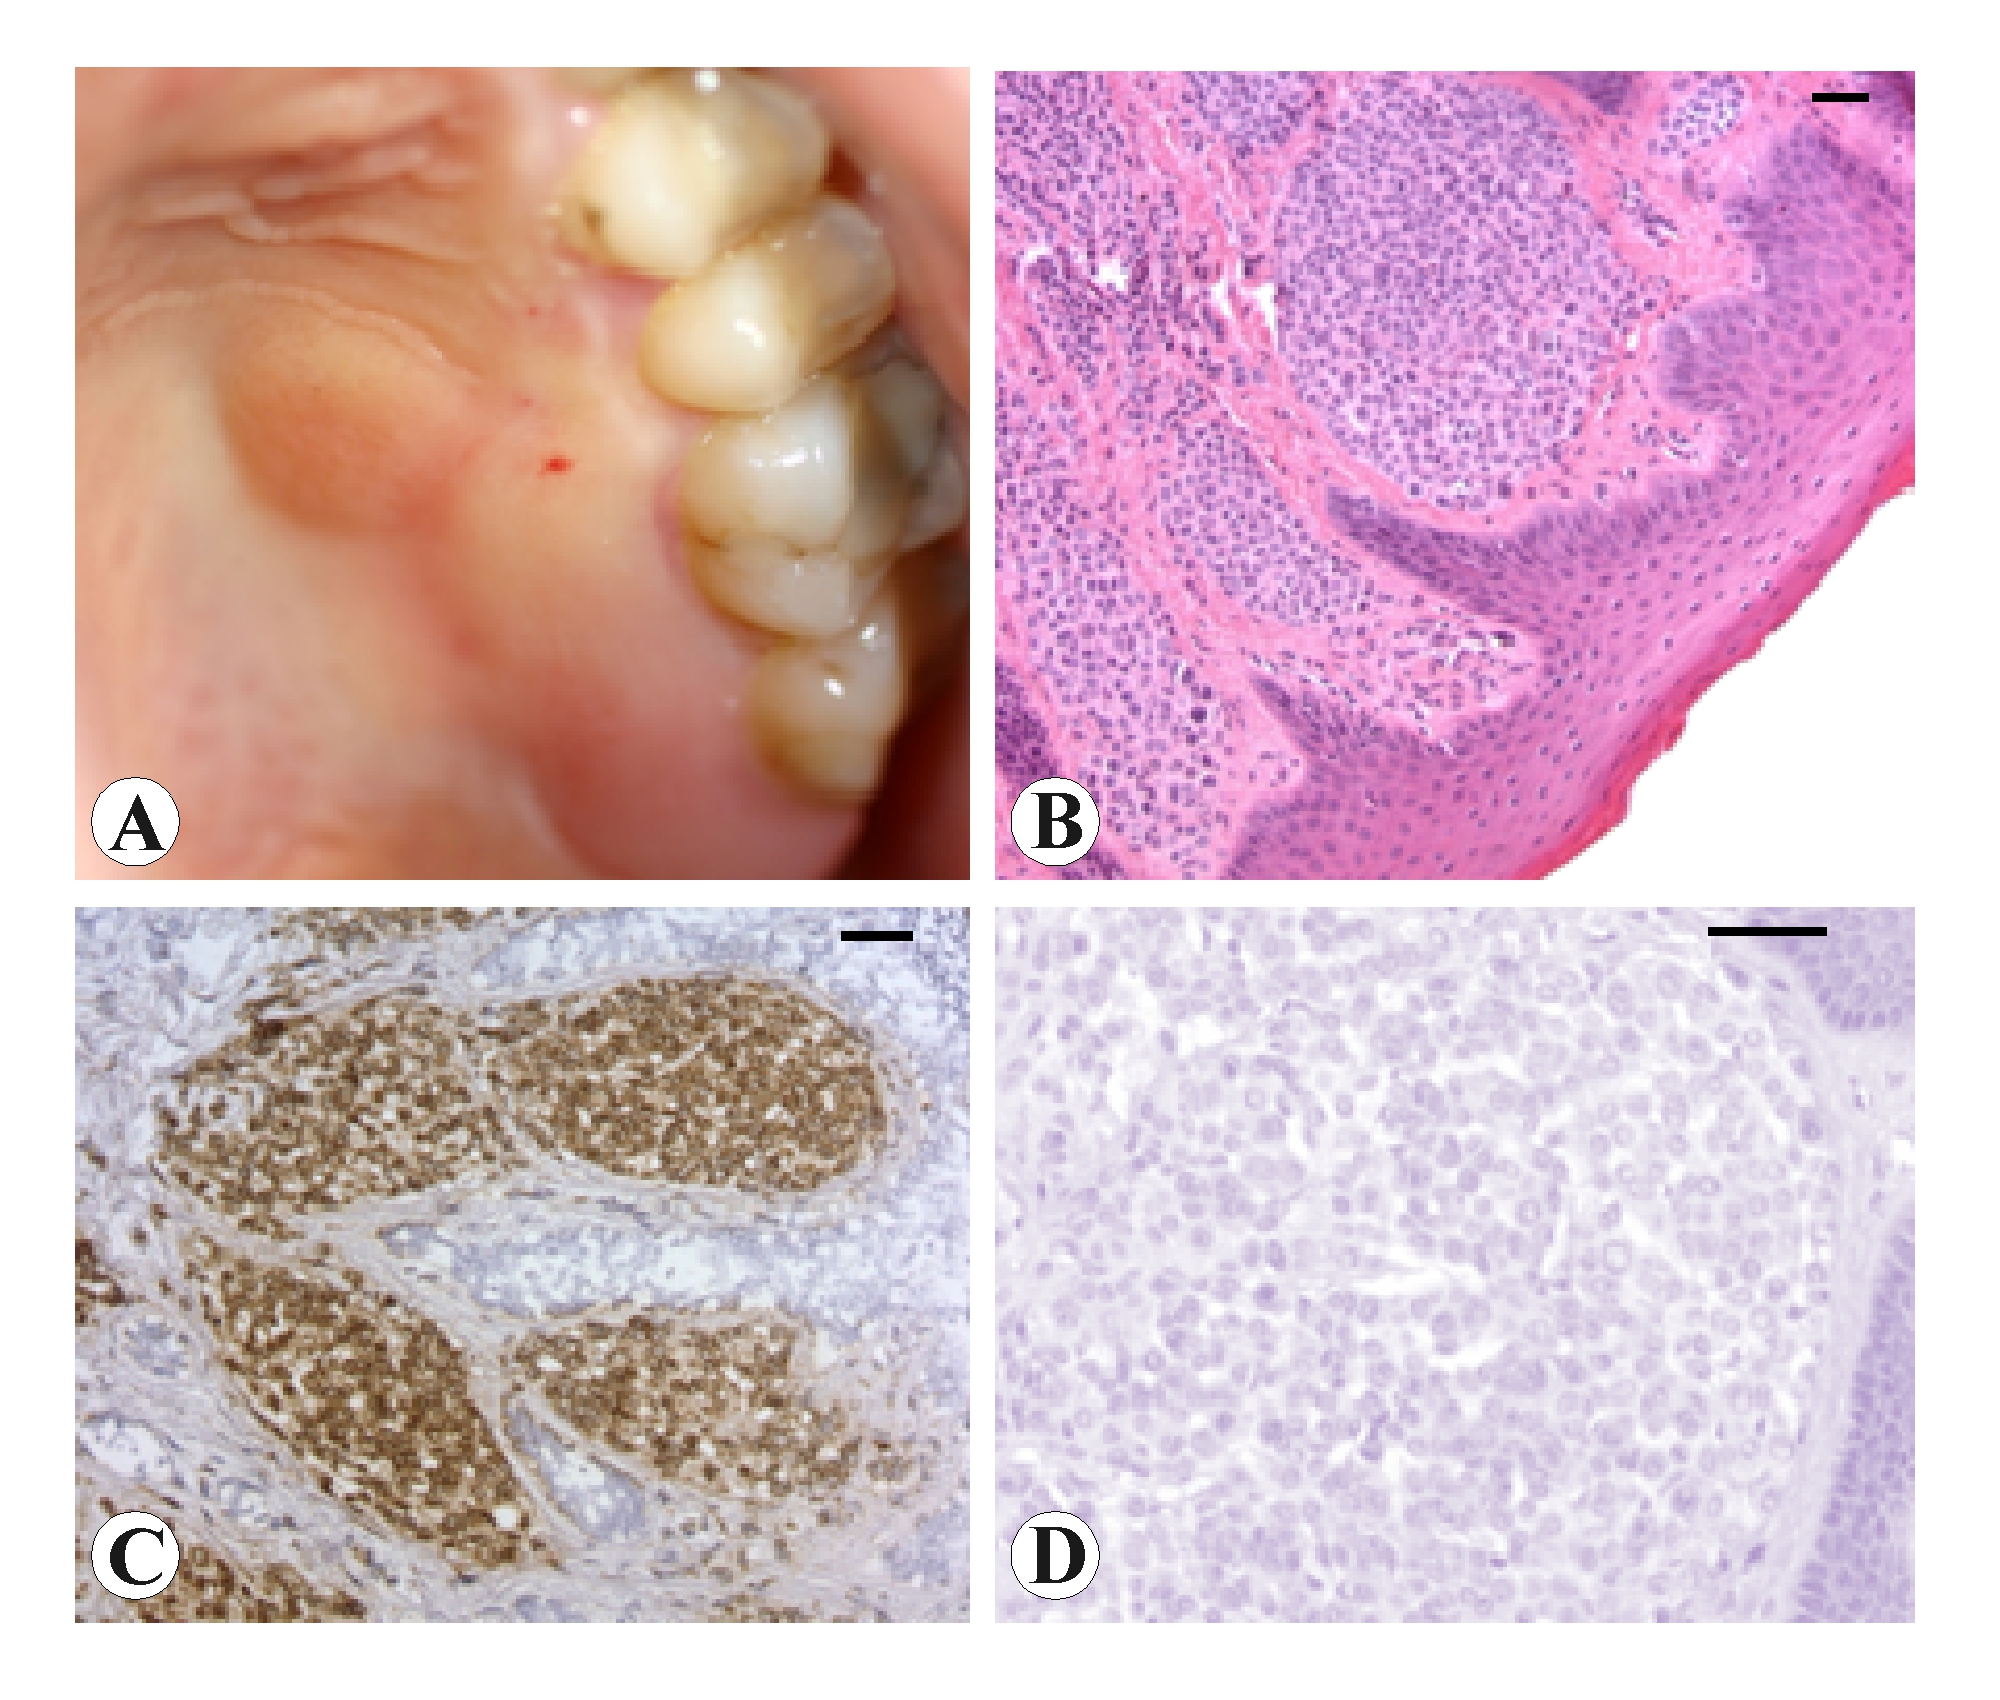 Non pigmented melanocytic nevus of the oral cavity. A case report